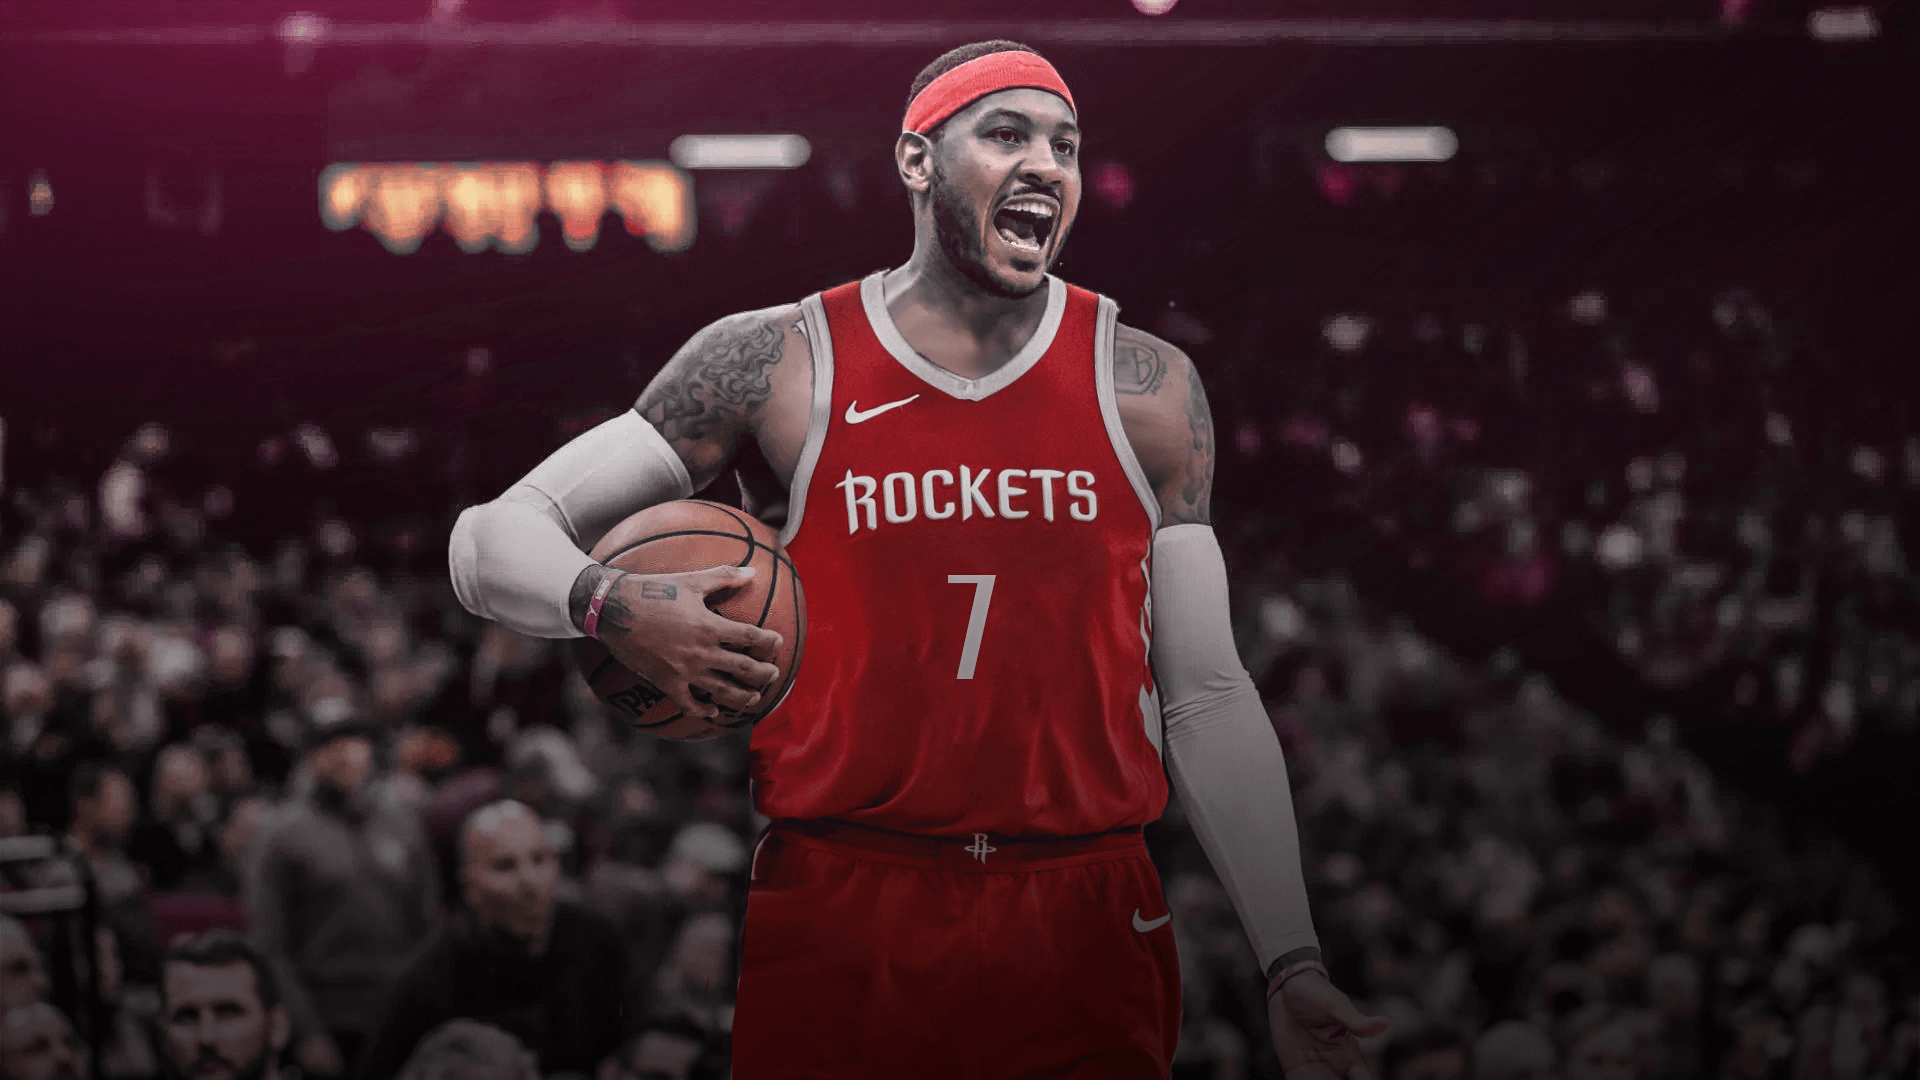 Carmelo Anthony will be used as 4 with Houston Rockets